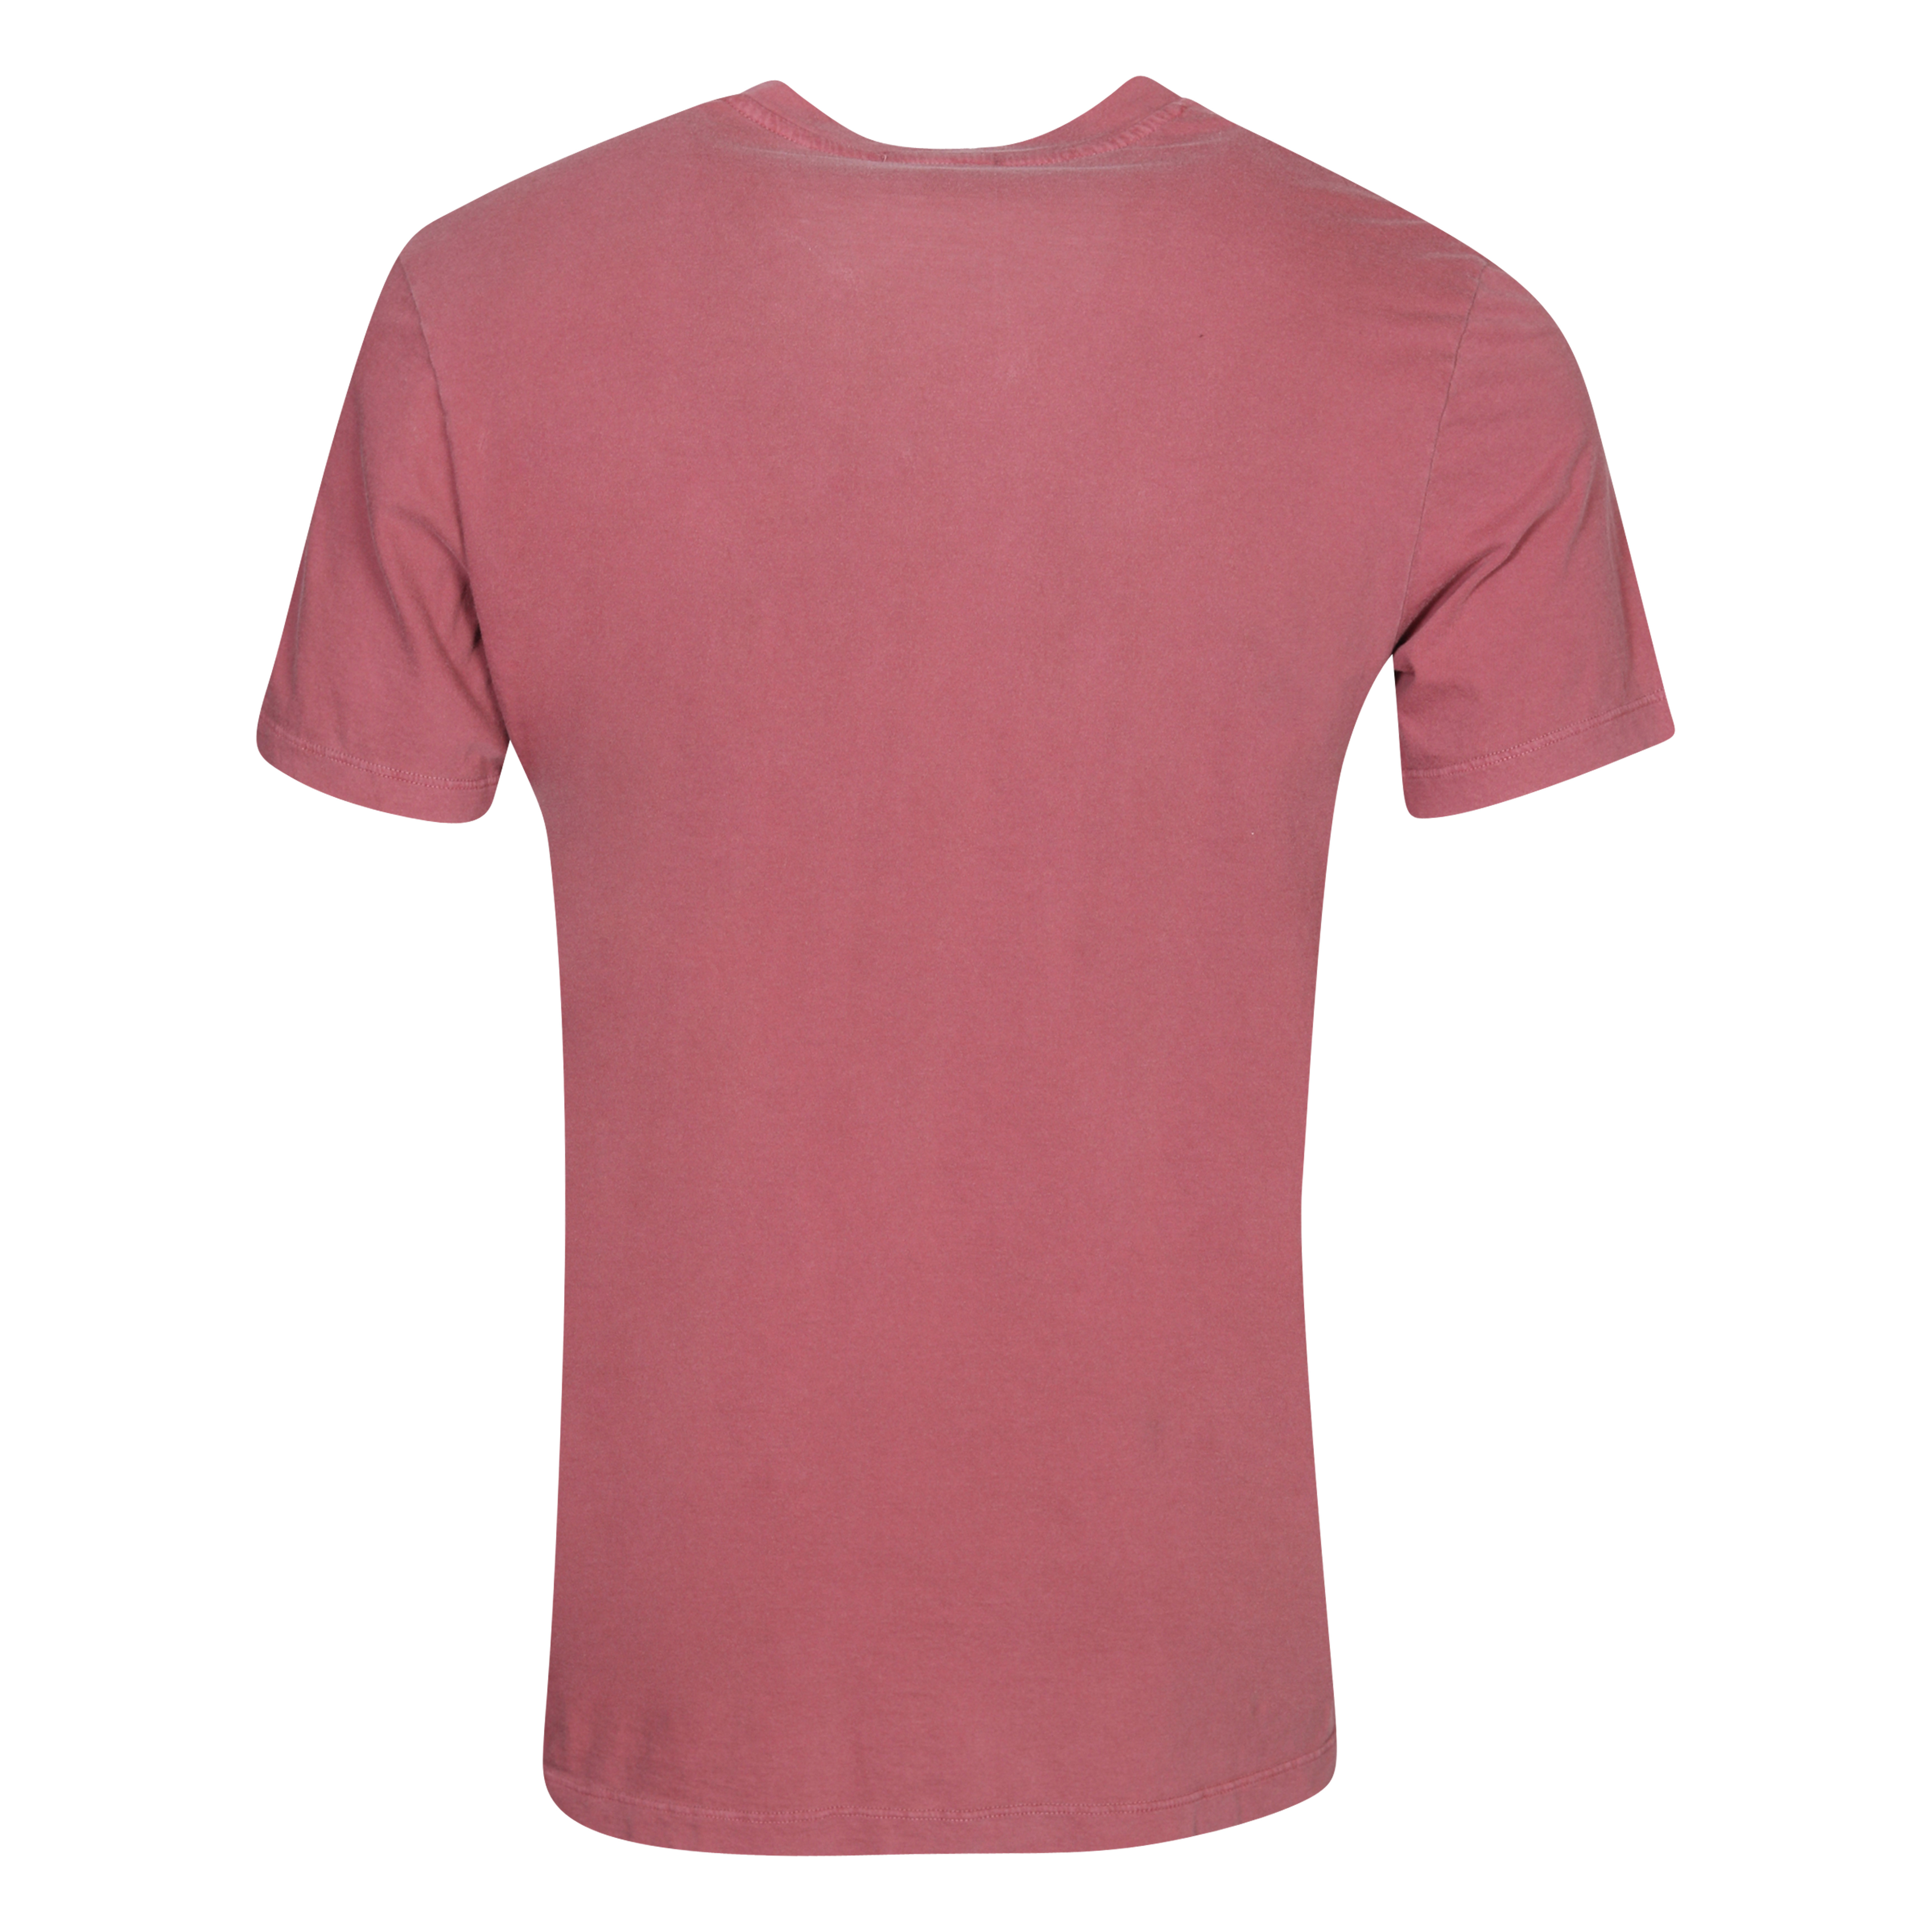 James Perse T-Shirt V-Neck in Mars